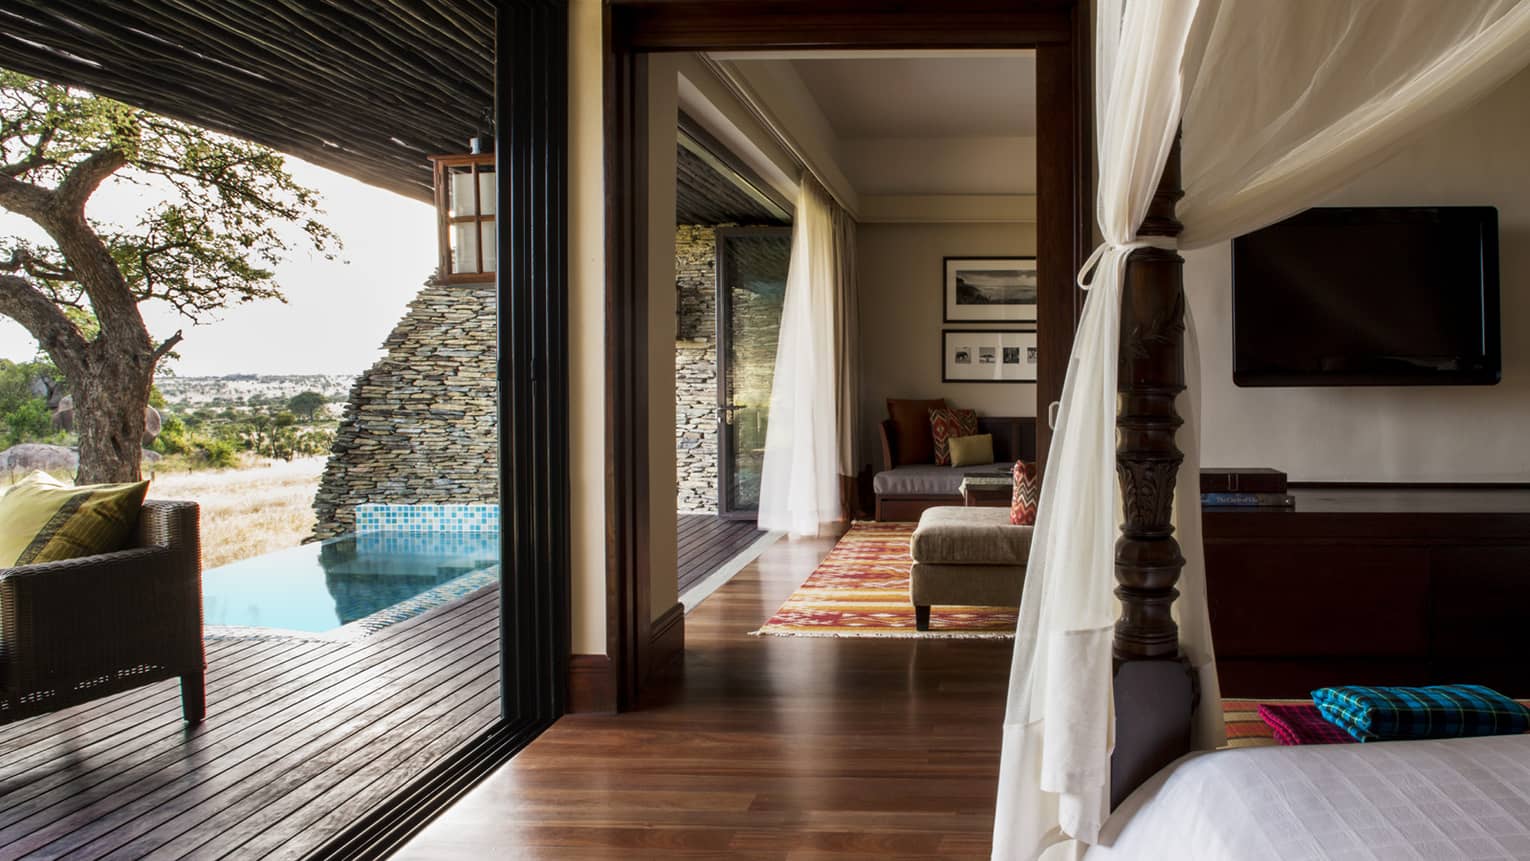 Terrace Suite Waterhole View poster bed, canopy by open wall to plunge pool